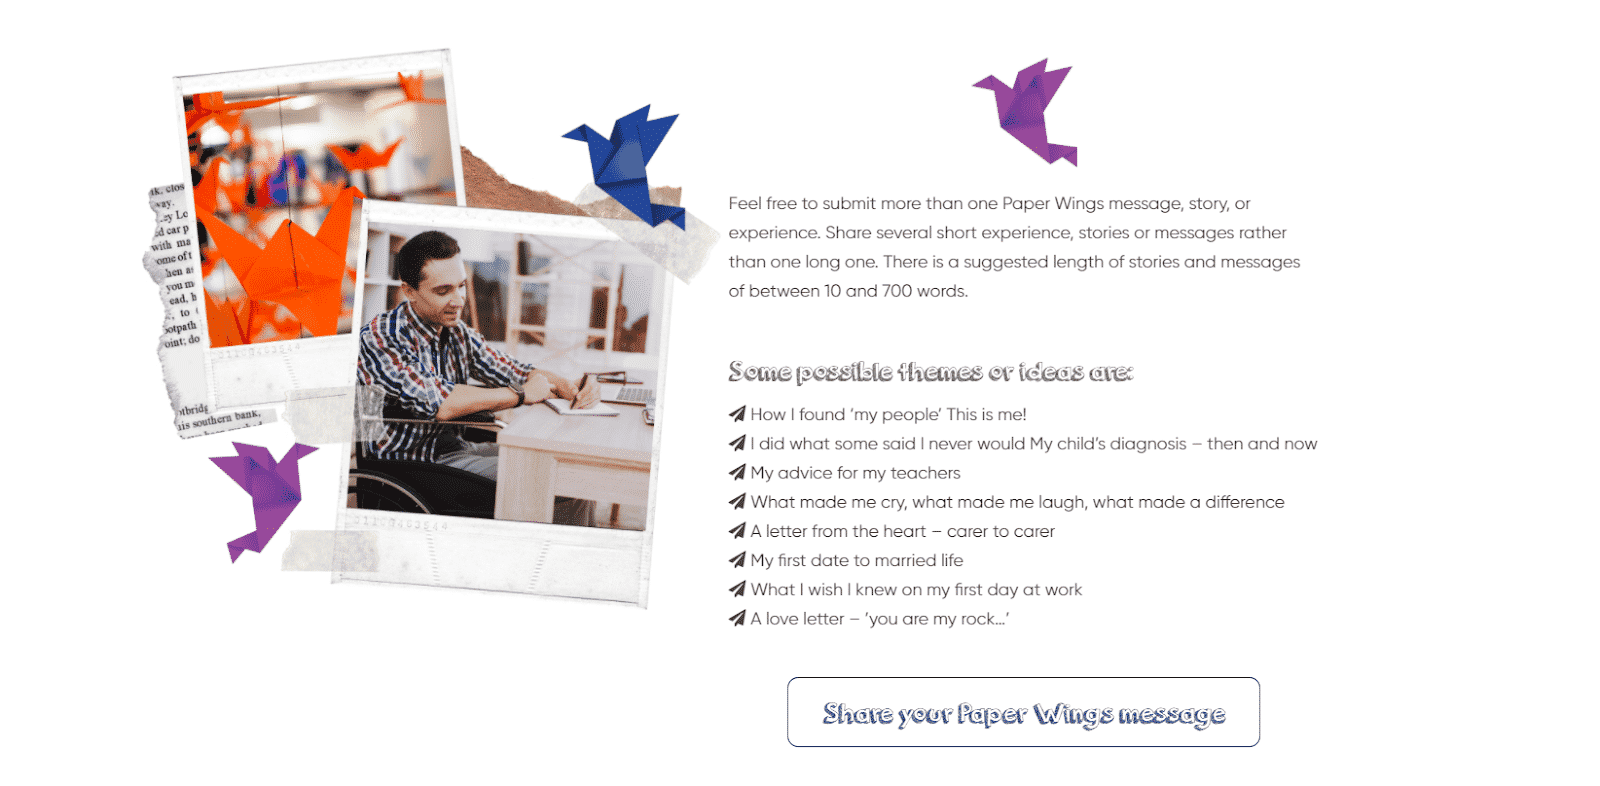 Image of a Paper Wings website page explaining how to submit your story. The text is surrounded by polaroid images and colourful paper cranes